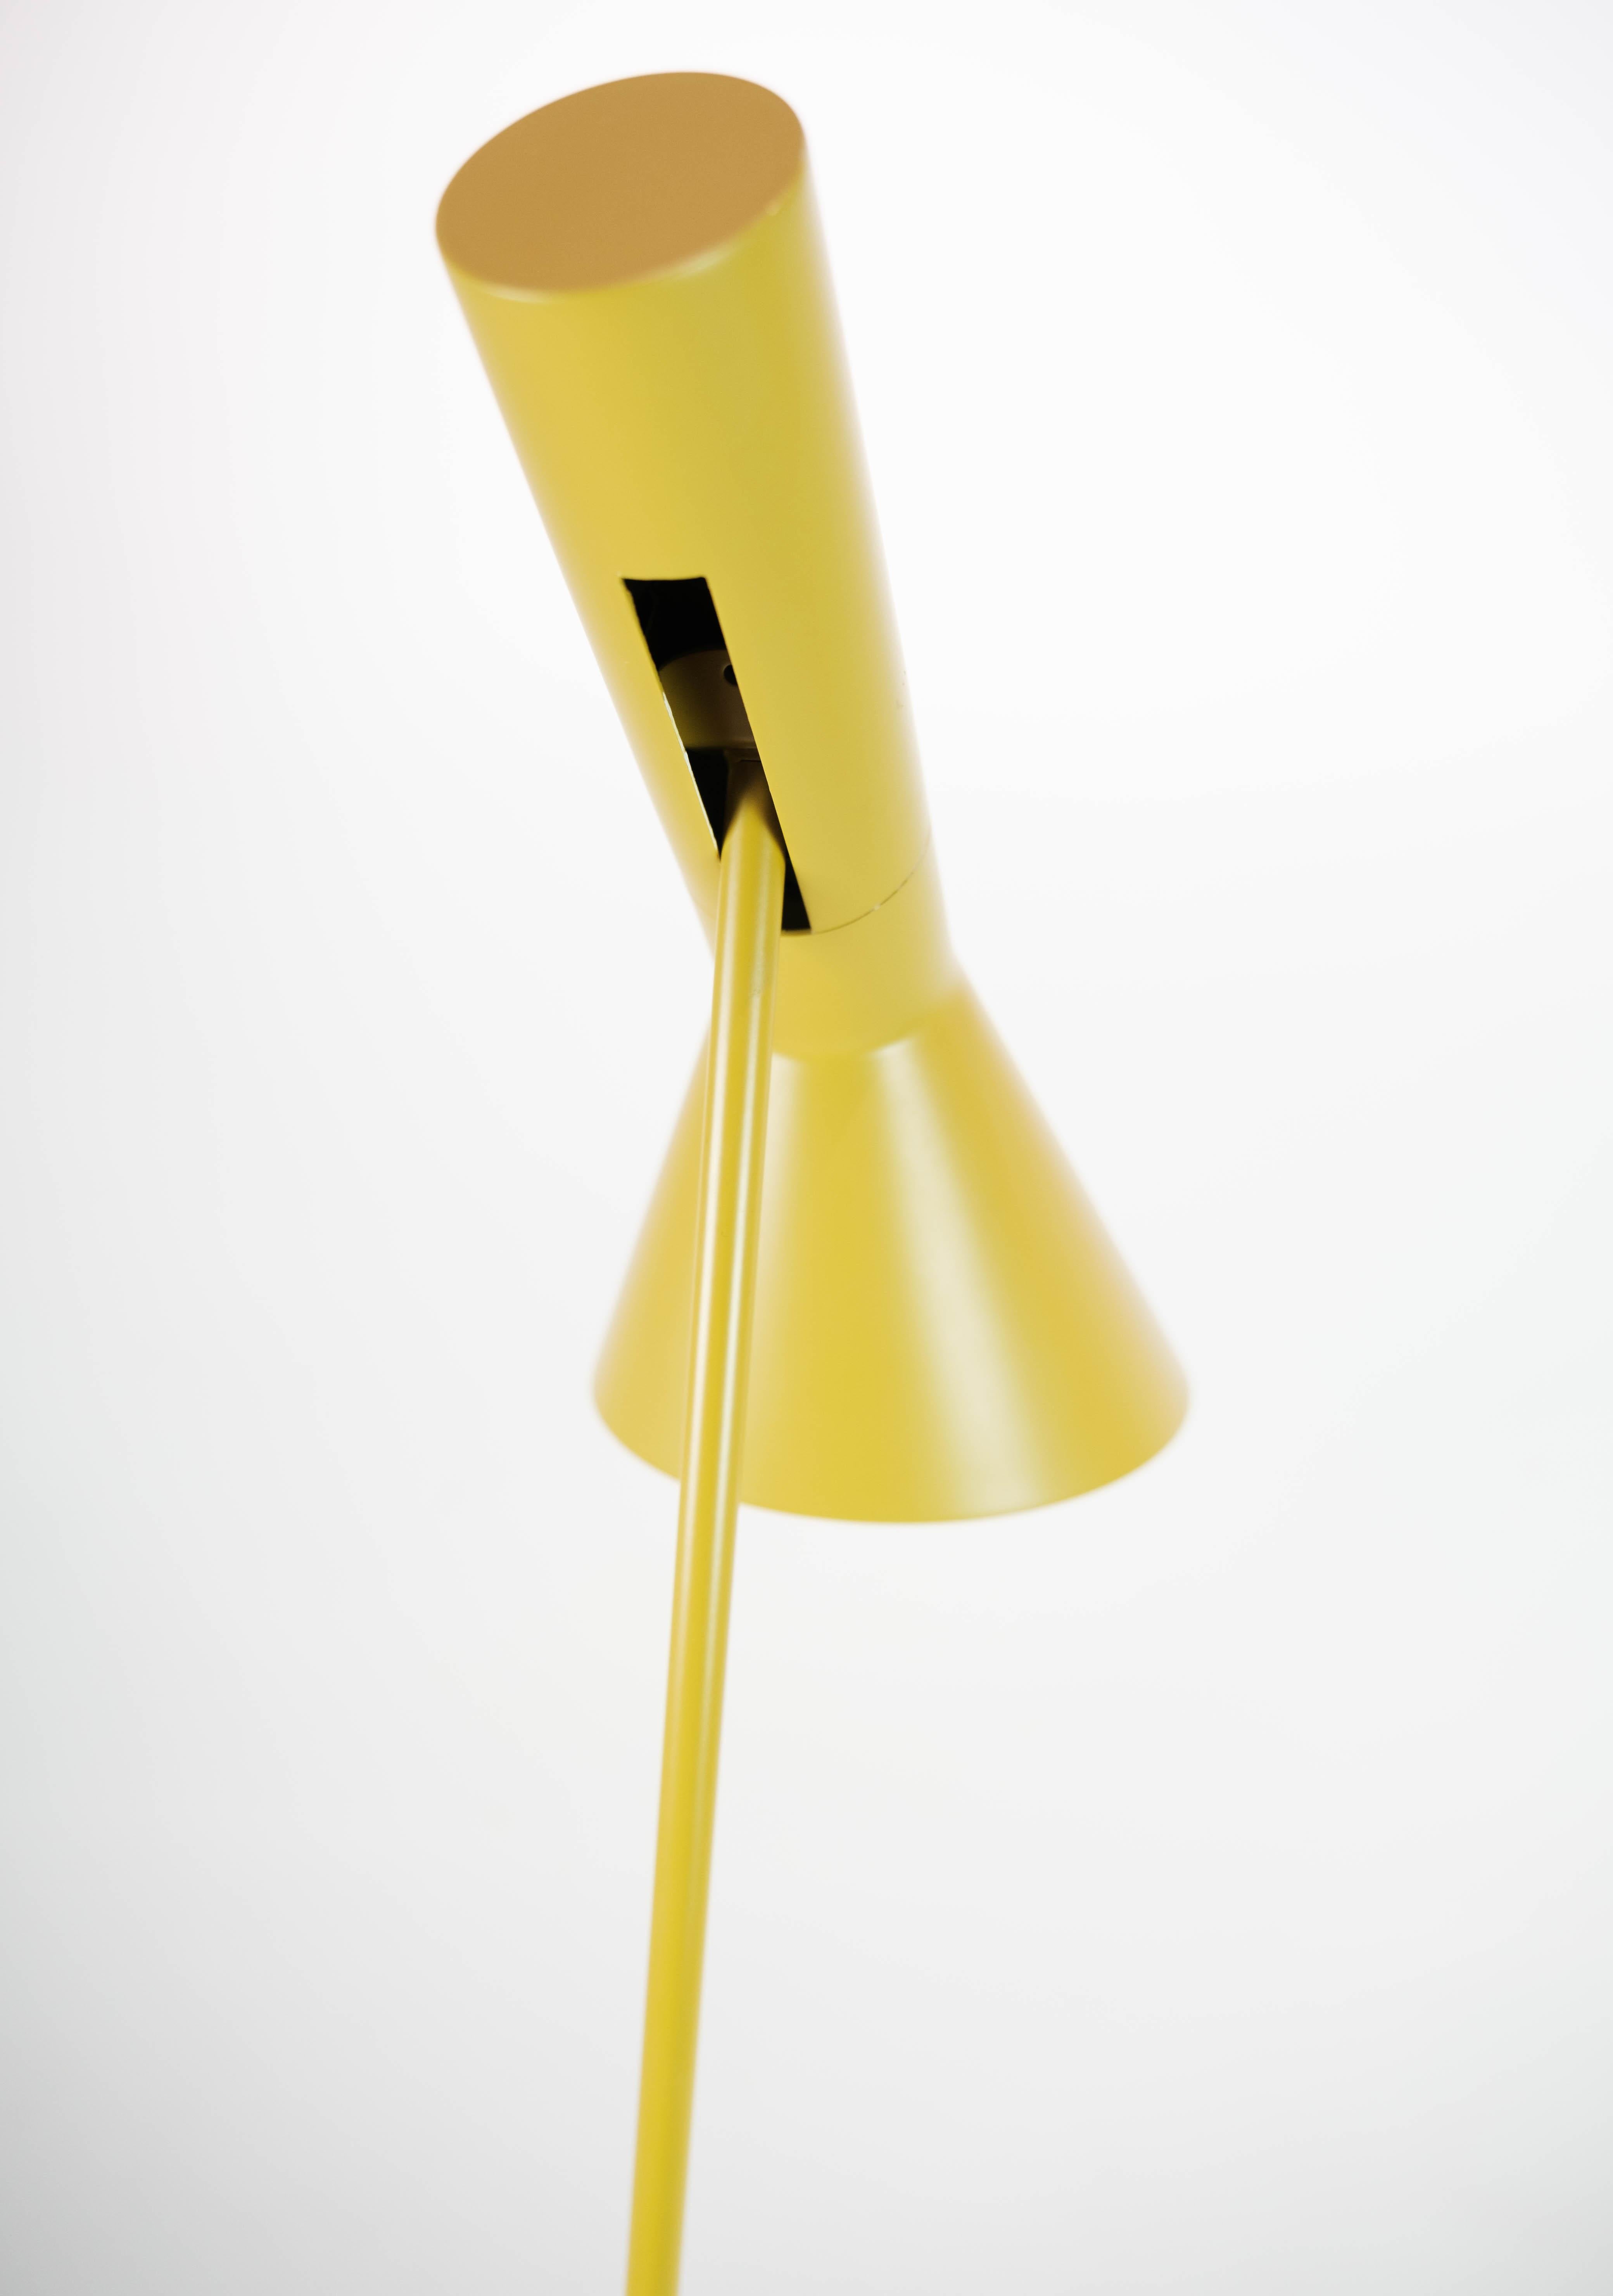 Danish Yellow Floor Lamp Designed by Arne Jacobsen and Manufactured by Louis Poulsen